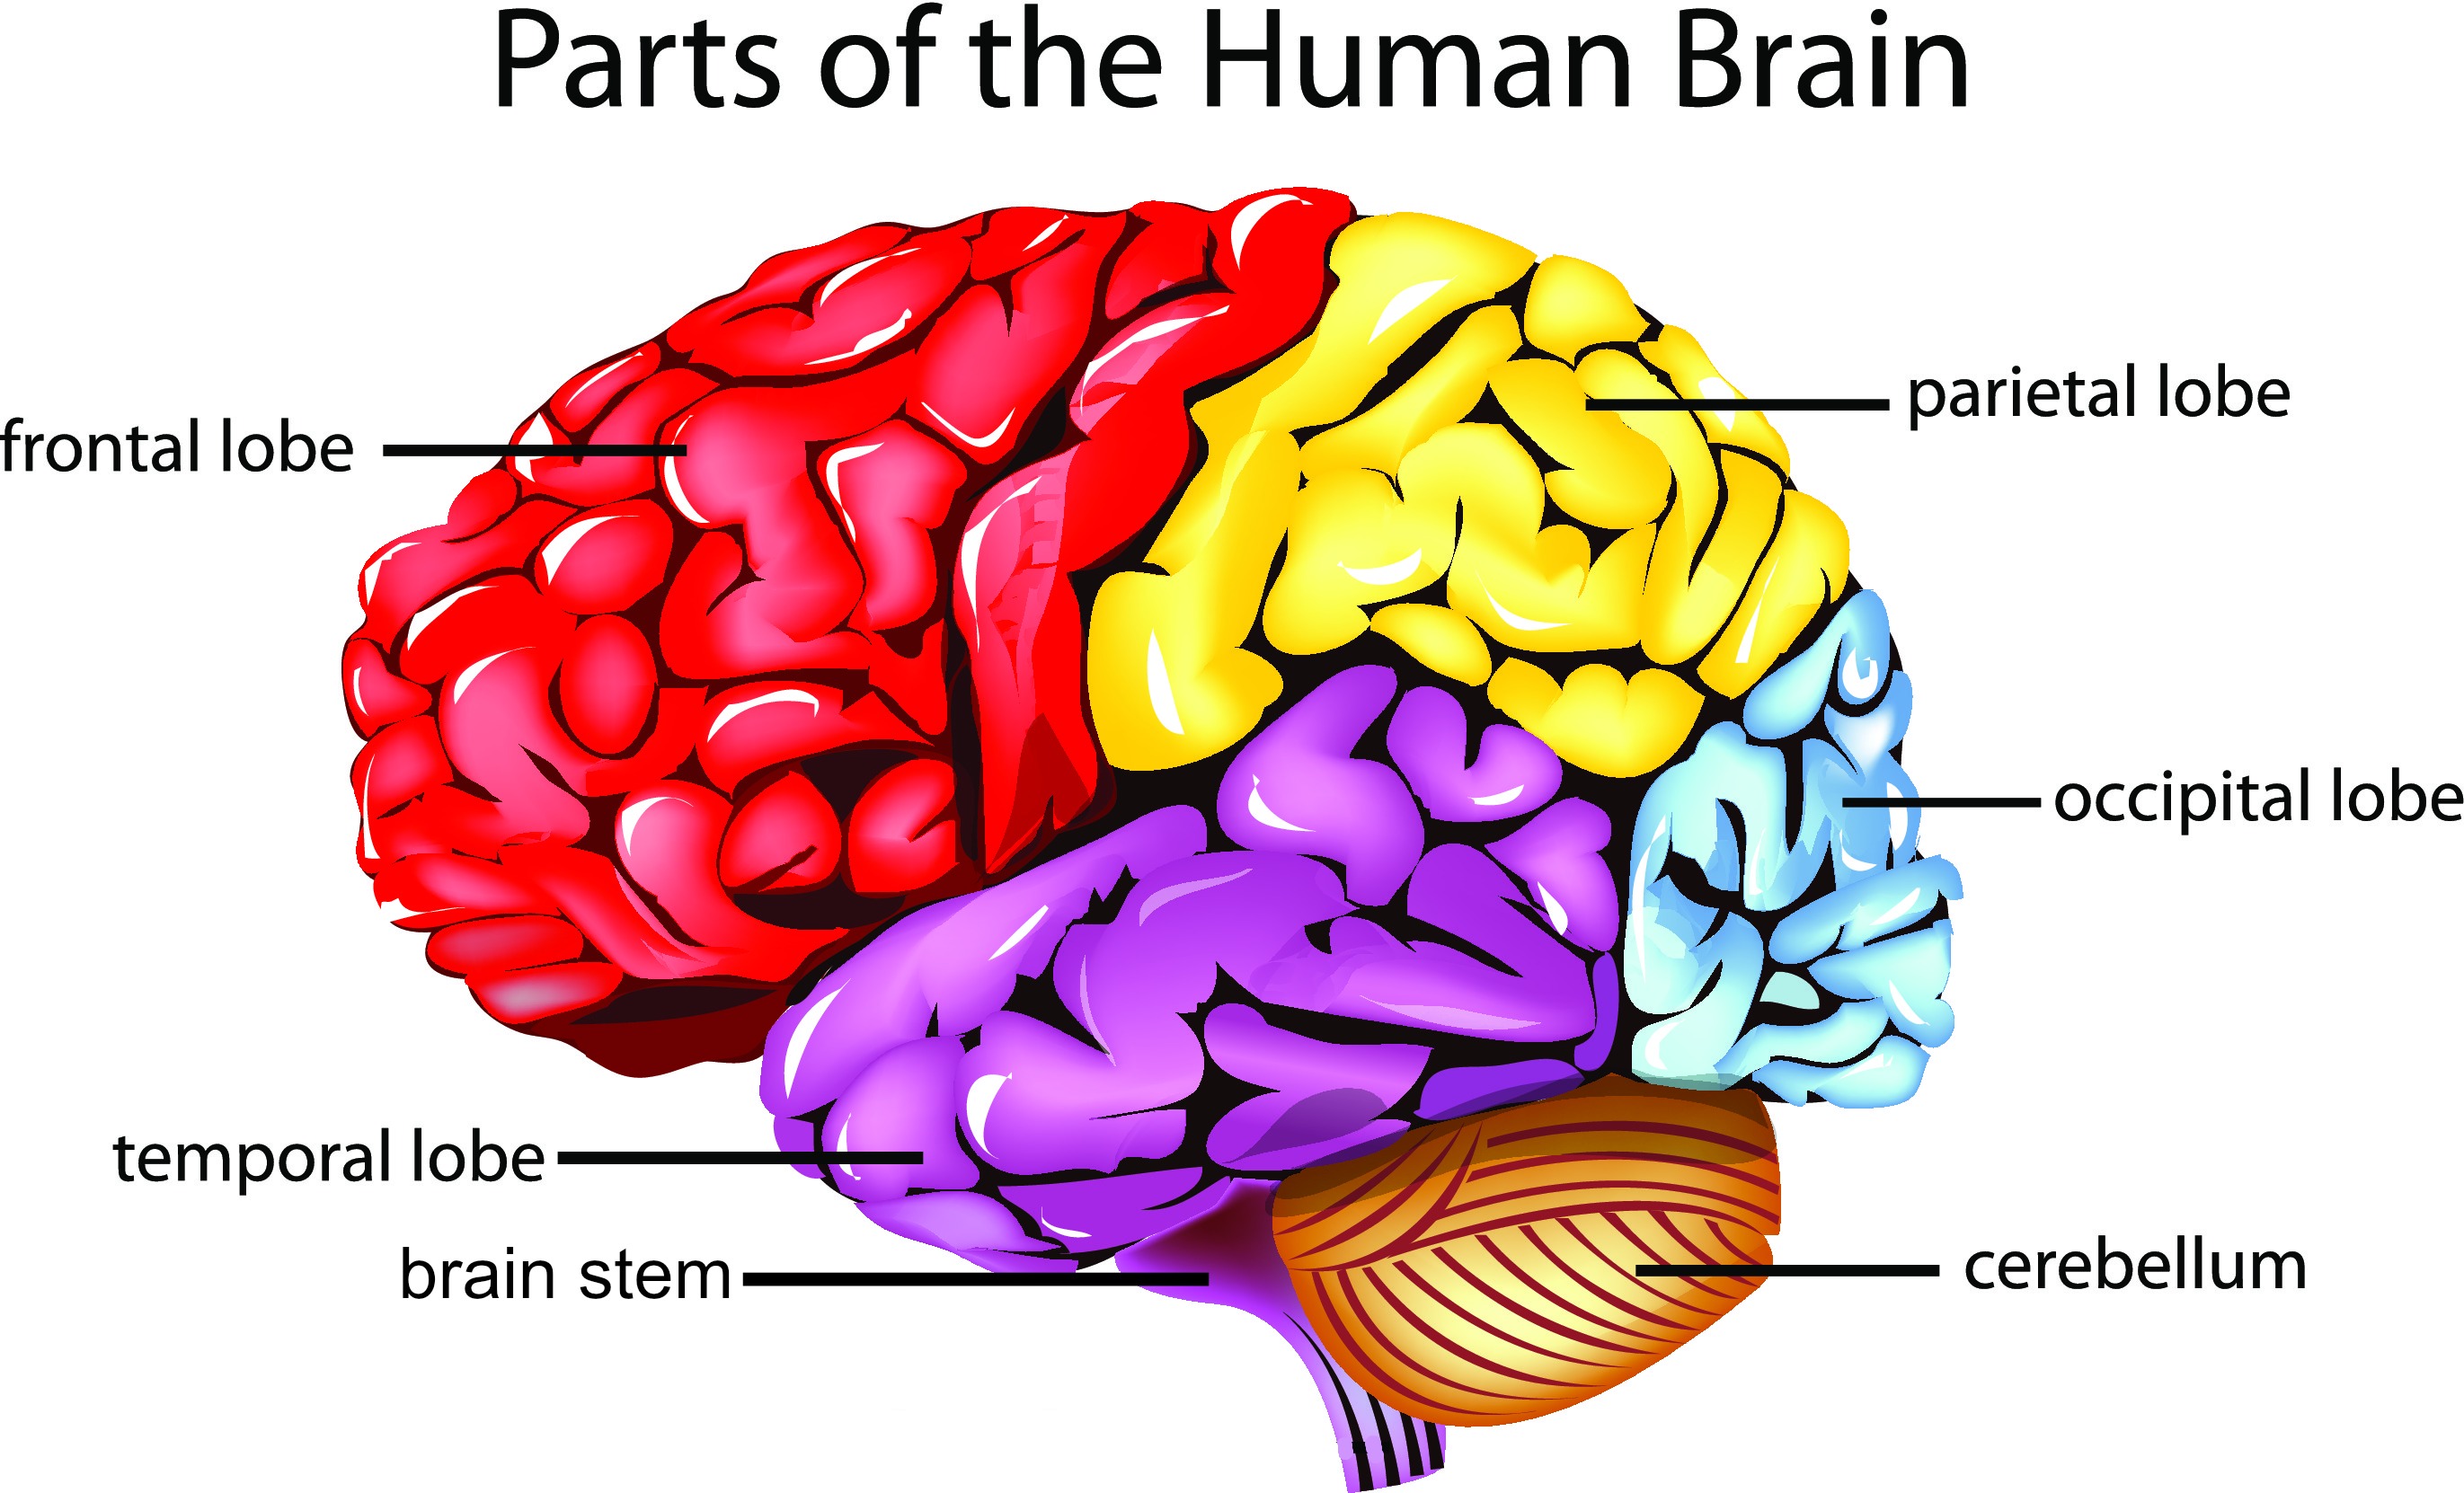 Take This Brain Quiz and Test Your Knowledge